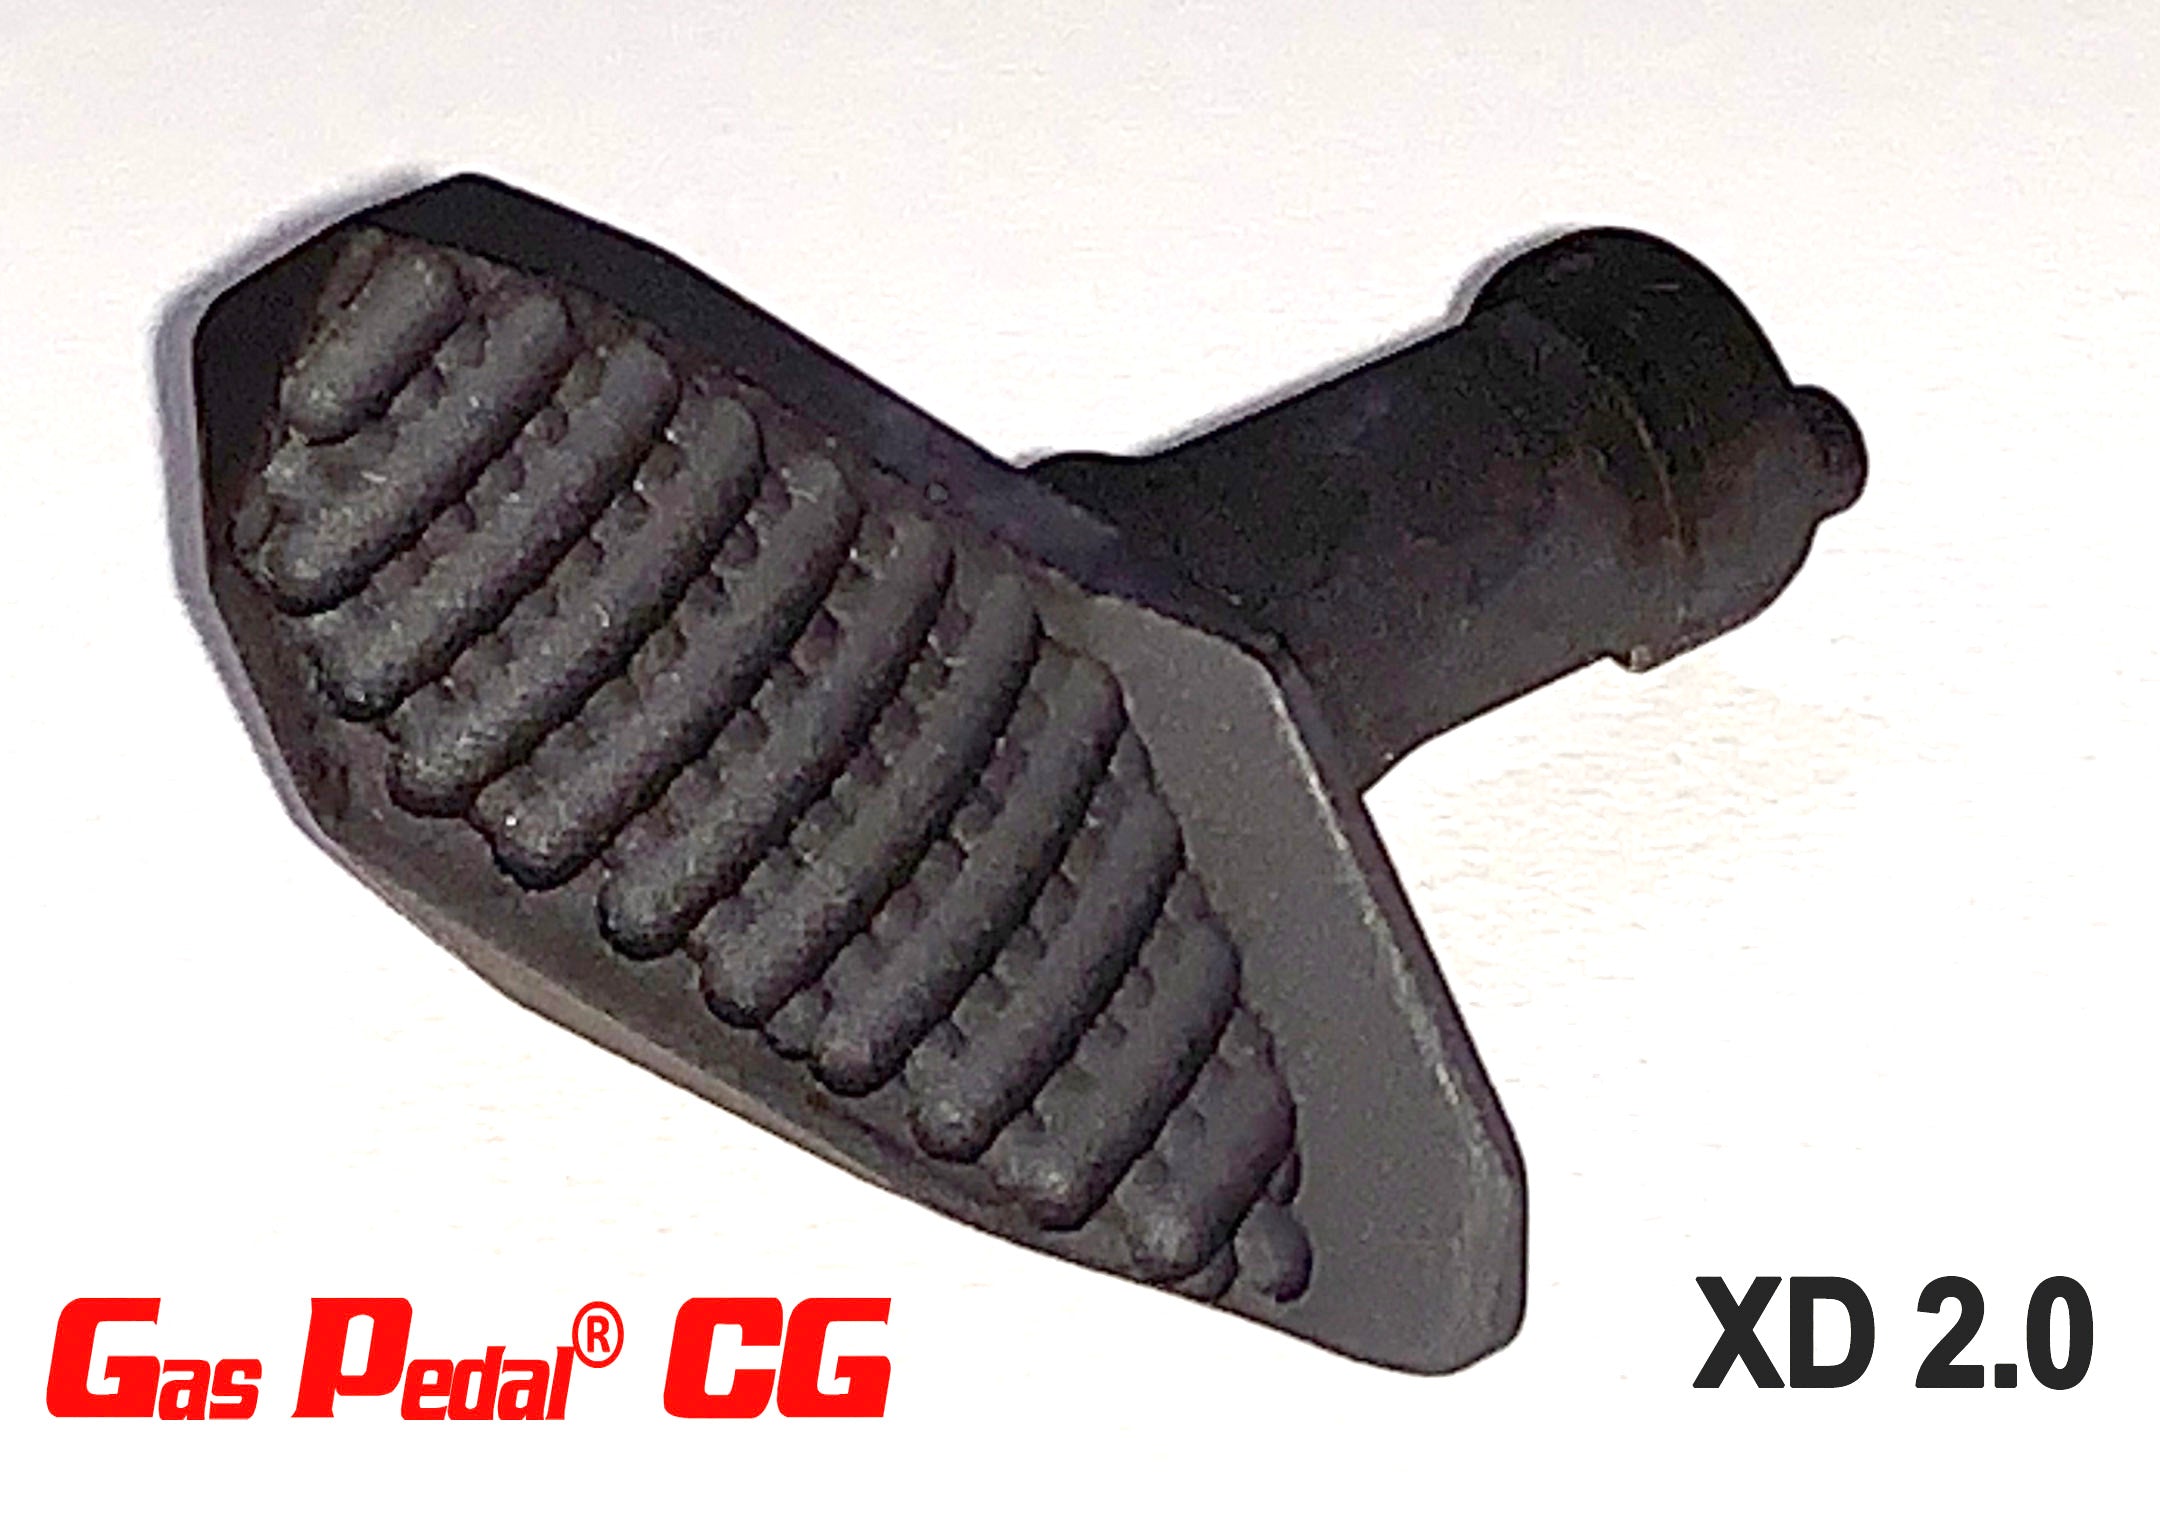 Gas Pedal® CG for Springfield XD Mod .2 and XDM  9, 10 mm